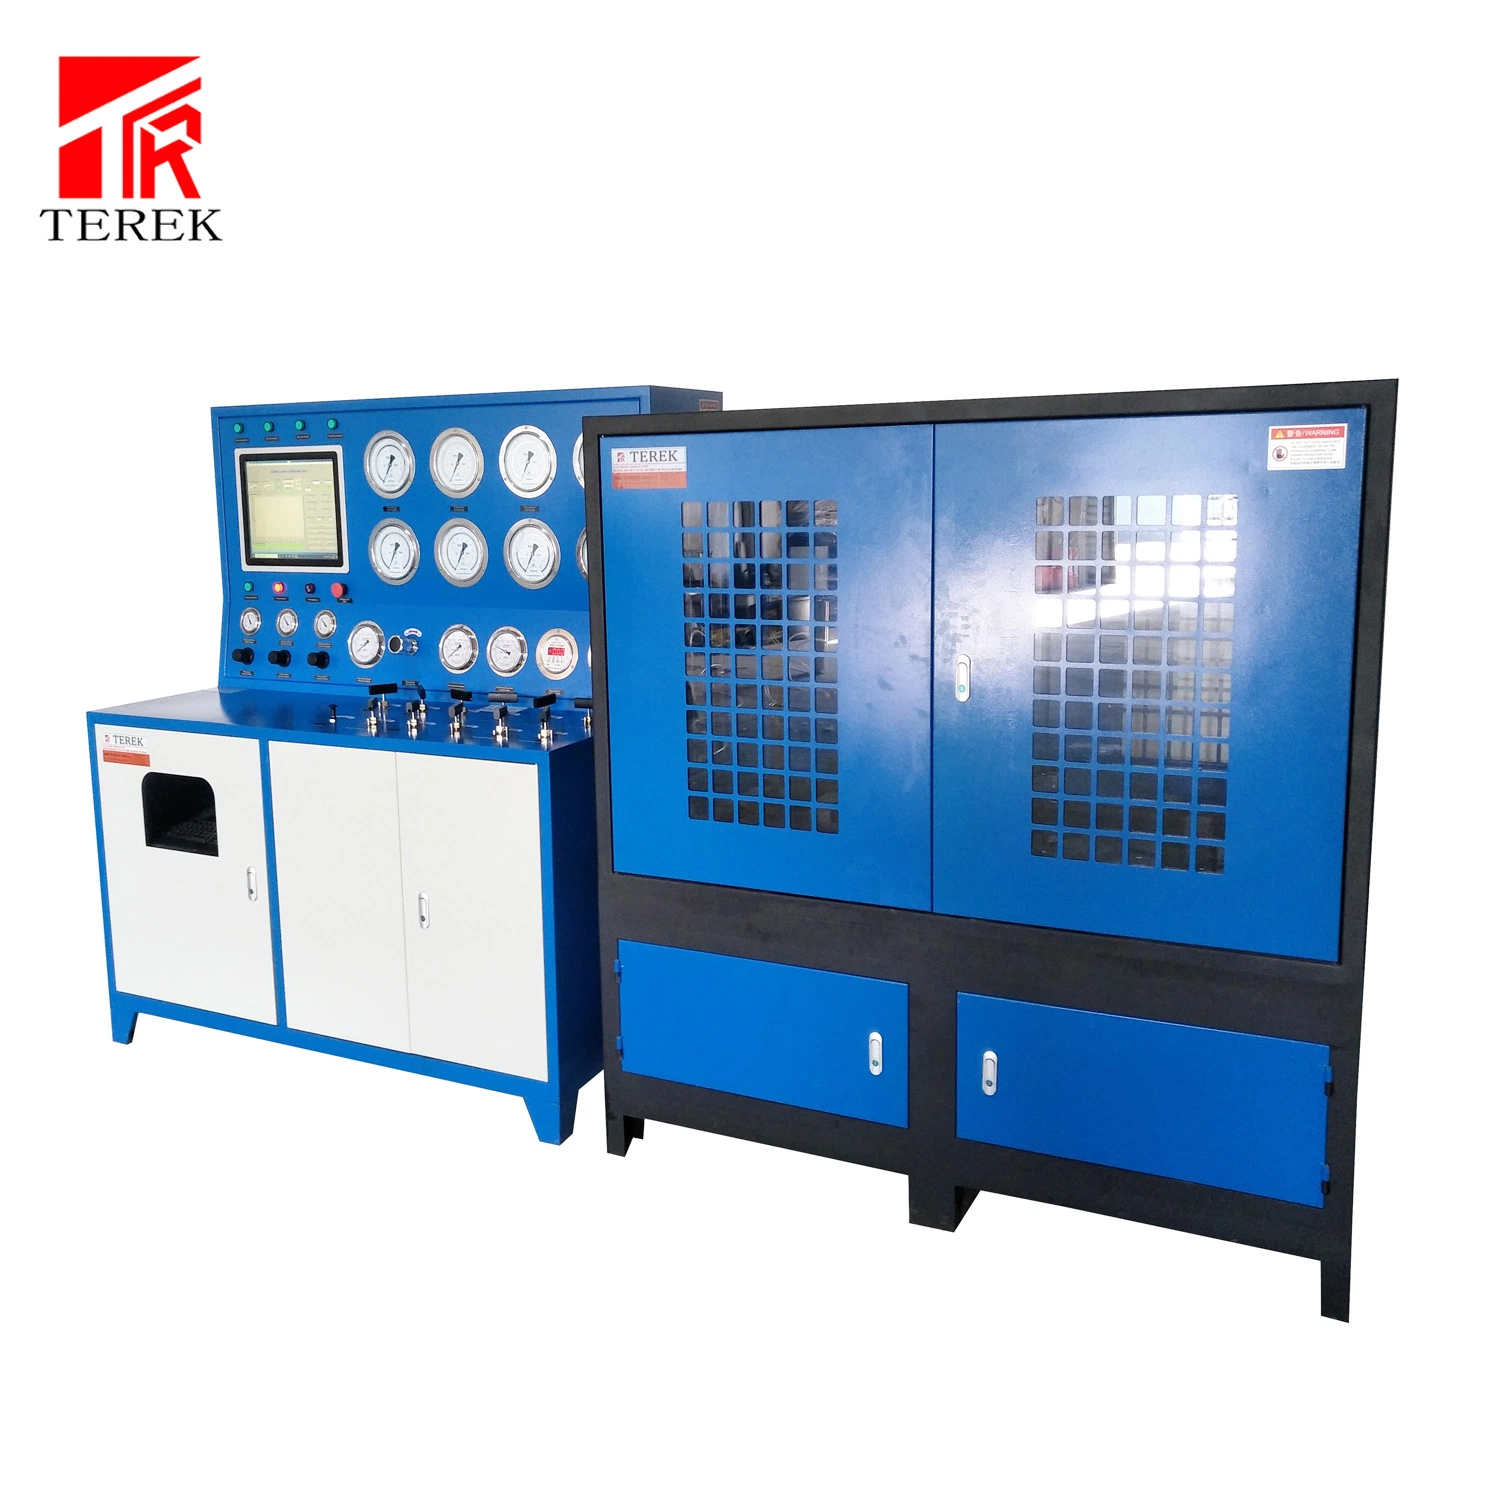 Terek Computer Control Safety Valve Test Bench for Calibrate The Valves Accurately